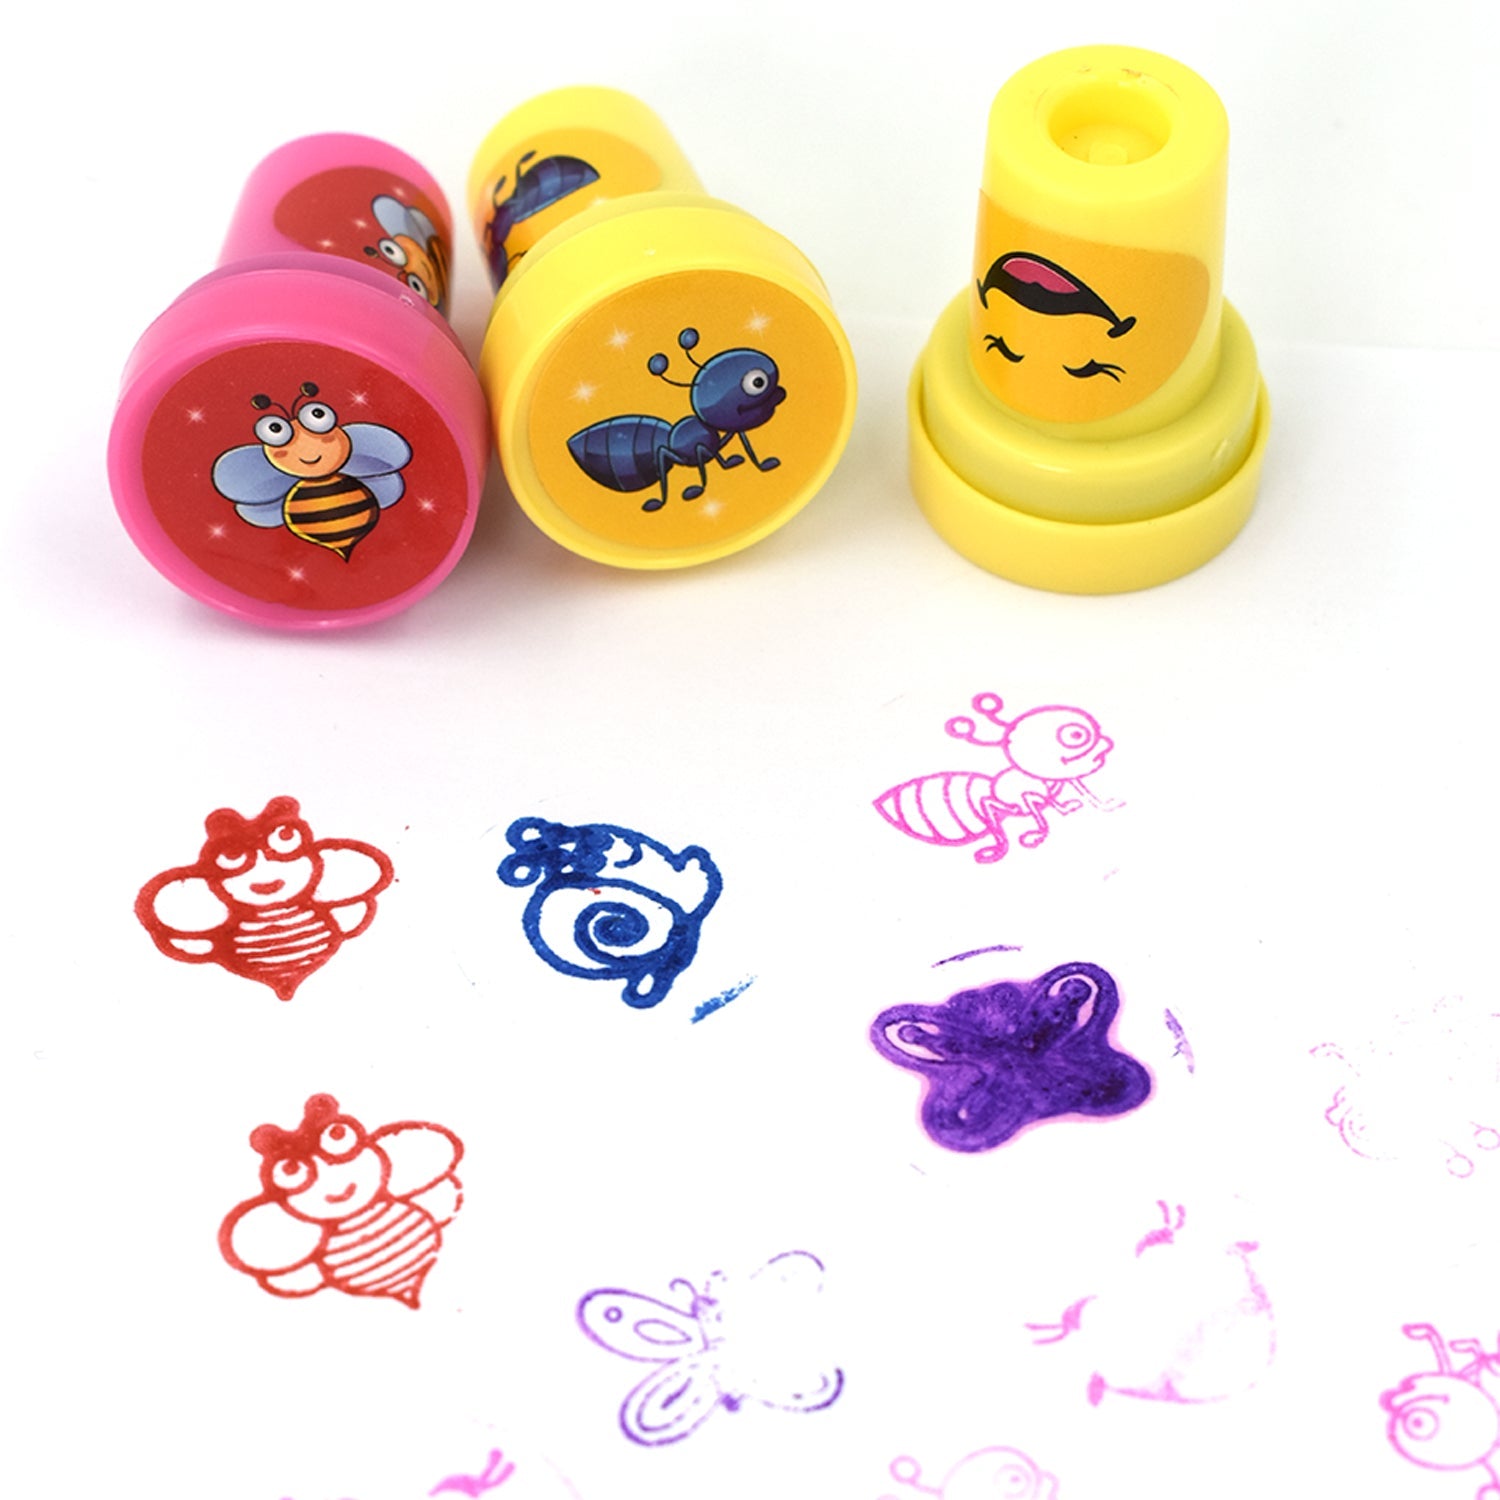 4805 12 Pc Stamp Set used in all types of household places by kids and children’s for playing purposes. freeshipping - DeoDap